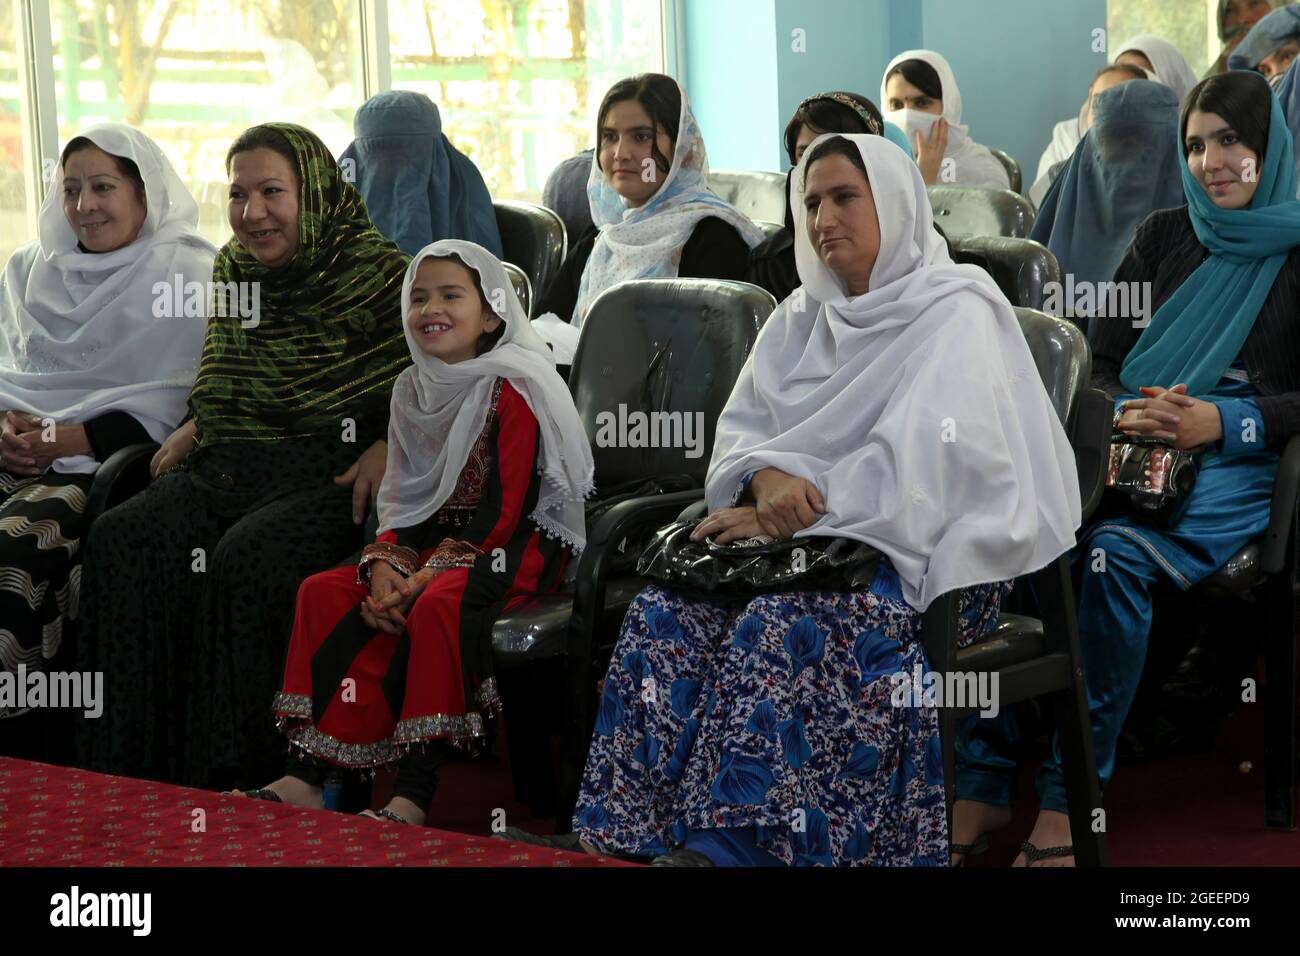 Local women listen to a speaker at an International Women's Day meeting at the Khost Provincial Headquarters in Khost city, Khost province, Afghanistan, March 9, 2013. The meeting was one of the largest gatherings of women to ever occur in Khost province. They discussed a woman's strength and responsibility in her household as well as higher education for all women and girls. (U.S. Army photo by Sgt. Kimberly Trumbull / Released) Stock Photo